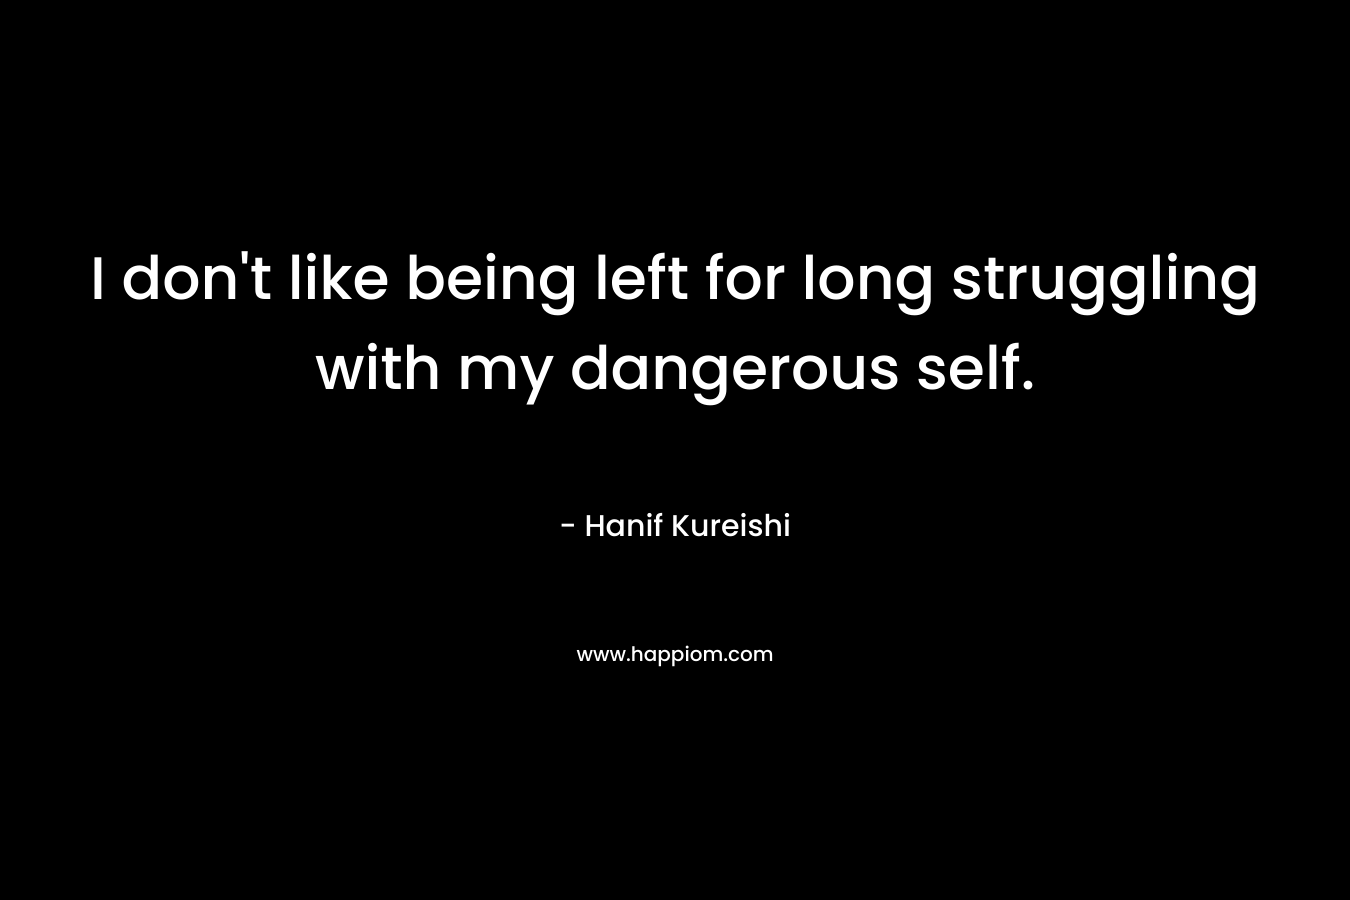 I don’t like being left for long struggling with my dangerous self. – Hanif Kureishi